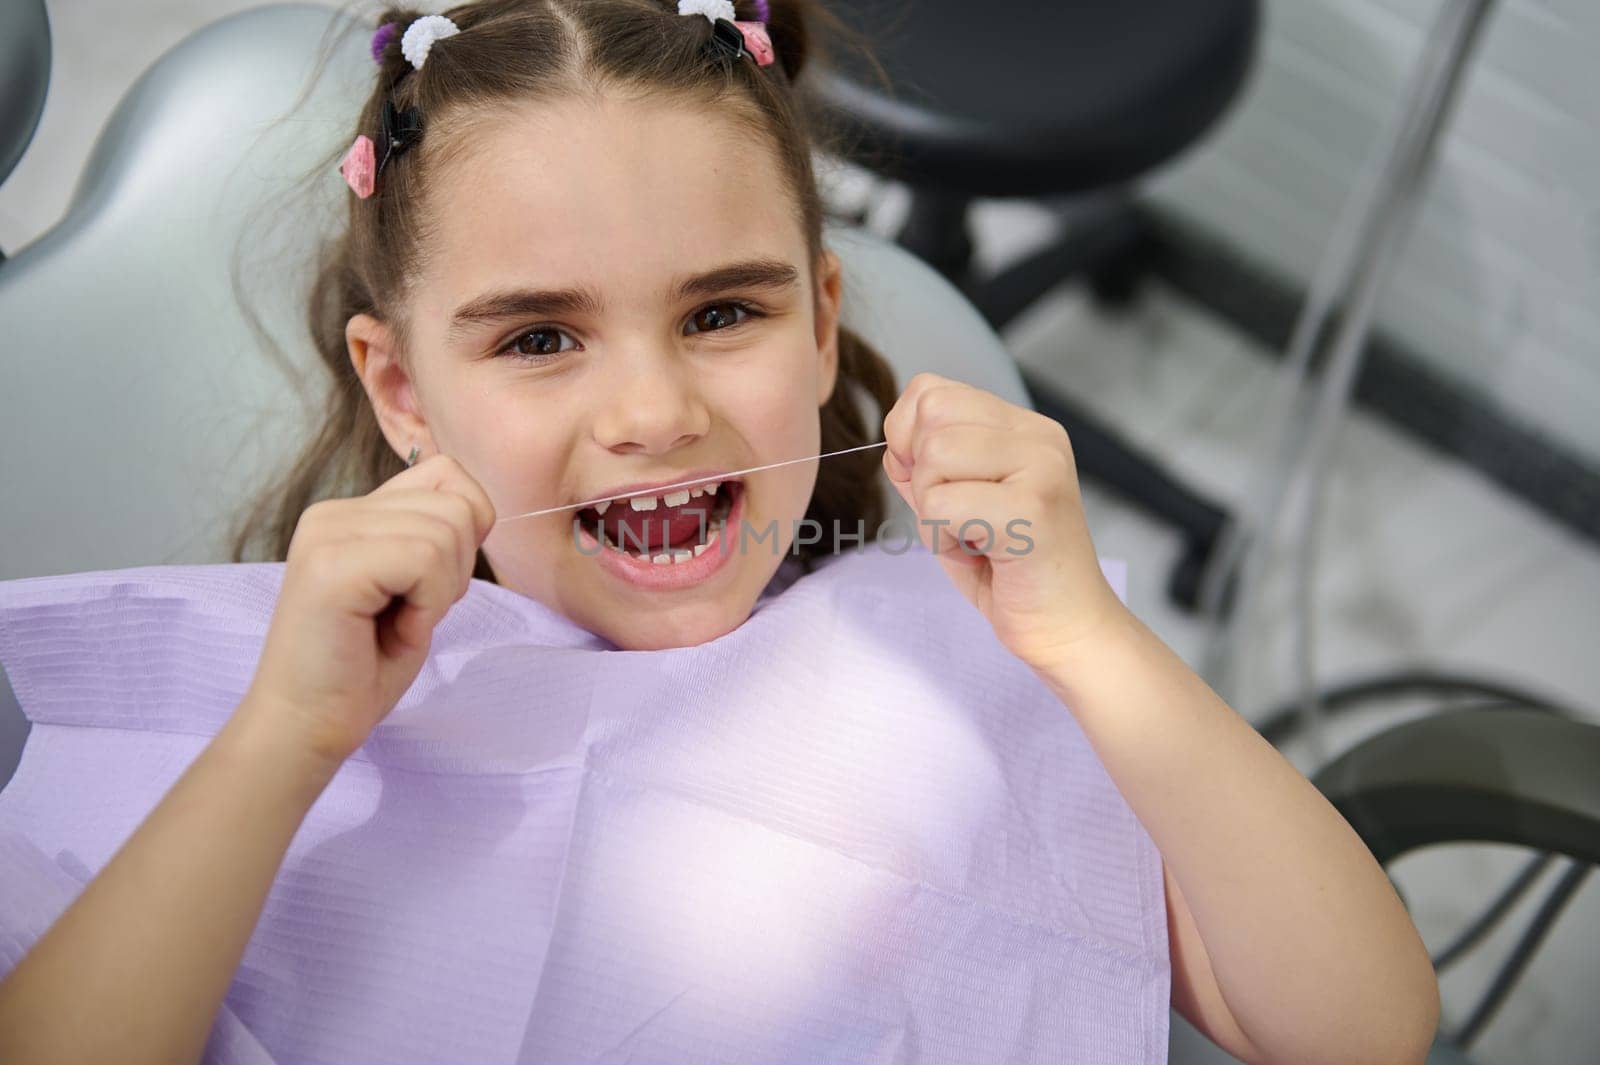 Close-up portrait of beautiful little girl using dental floss, brushing her teeth, sitting in the dentist's chair and smiling cutely, looking at the camera. Oral hygiene concept for caries prevention